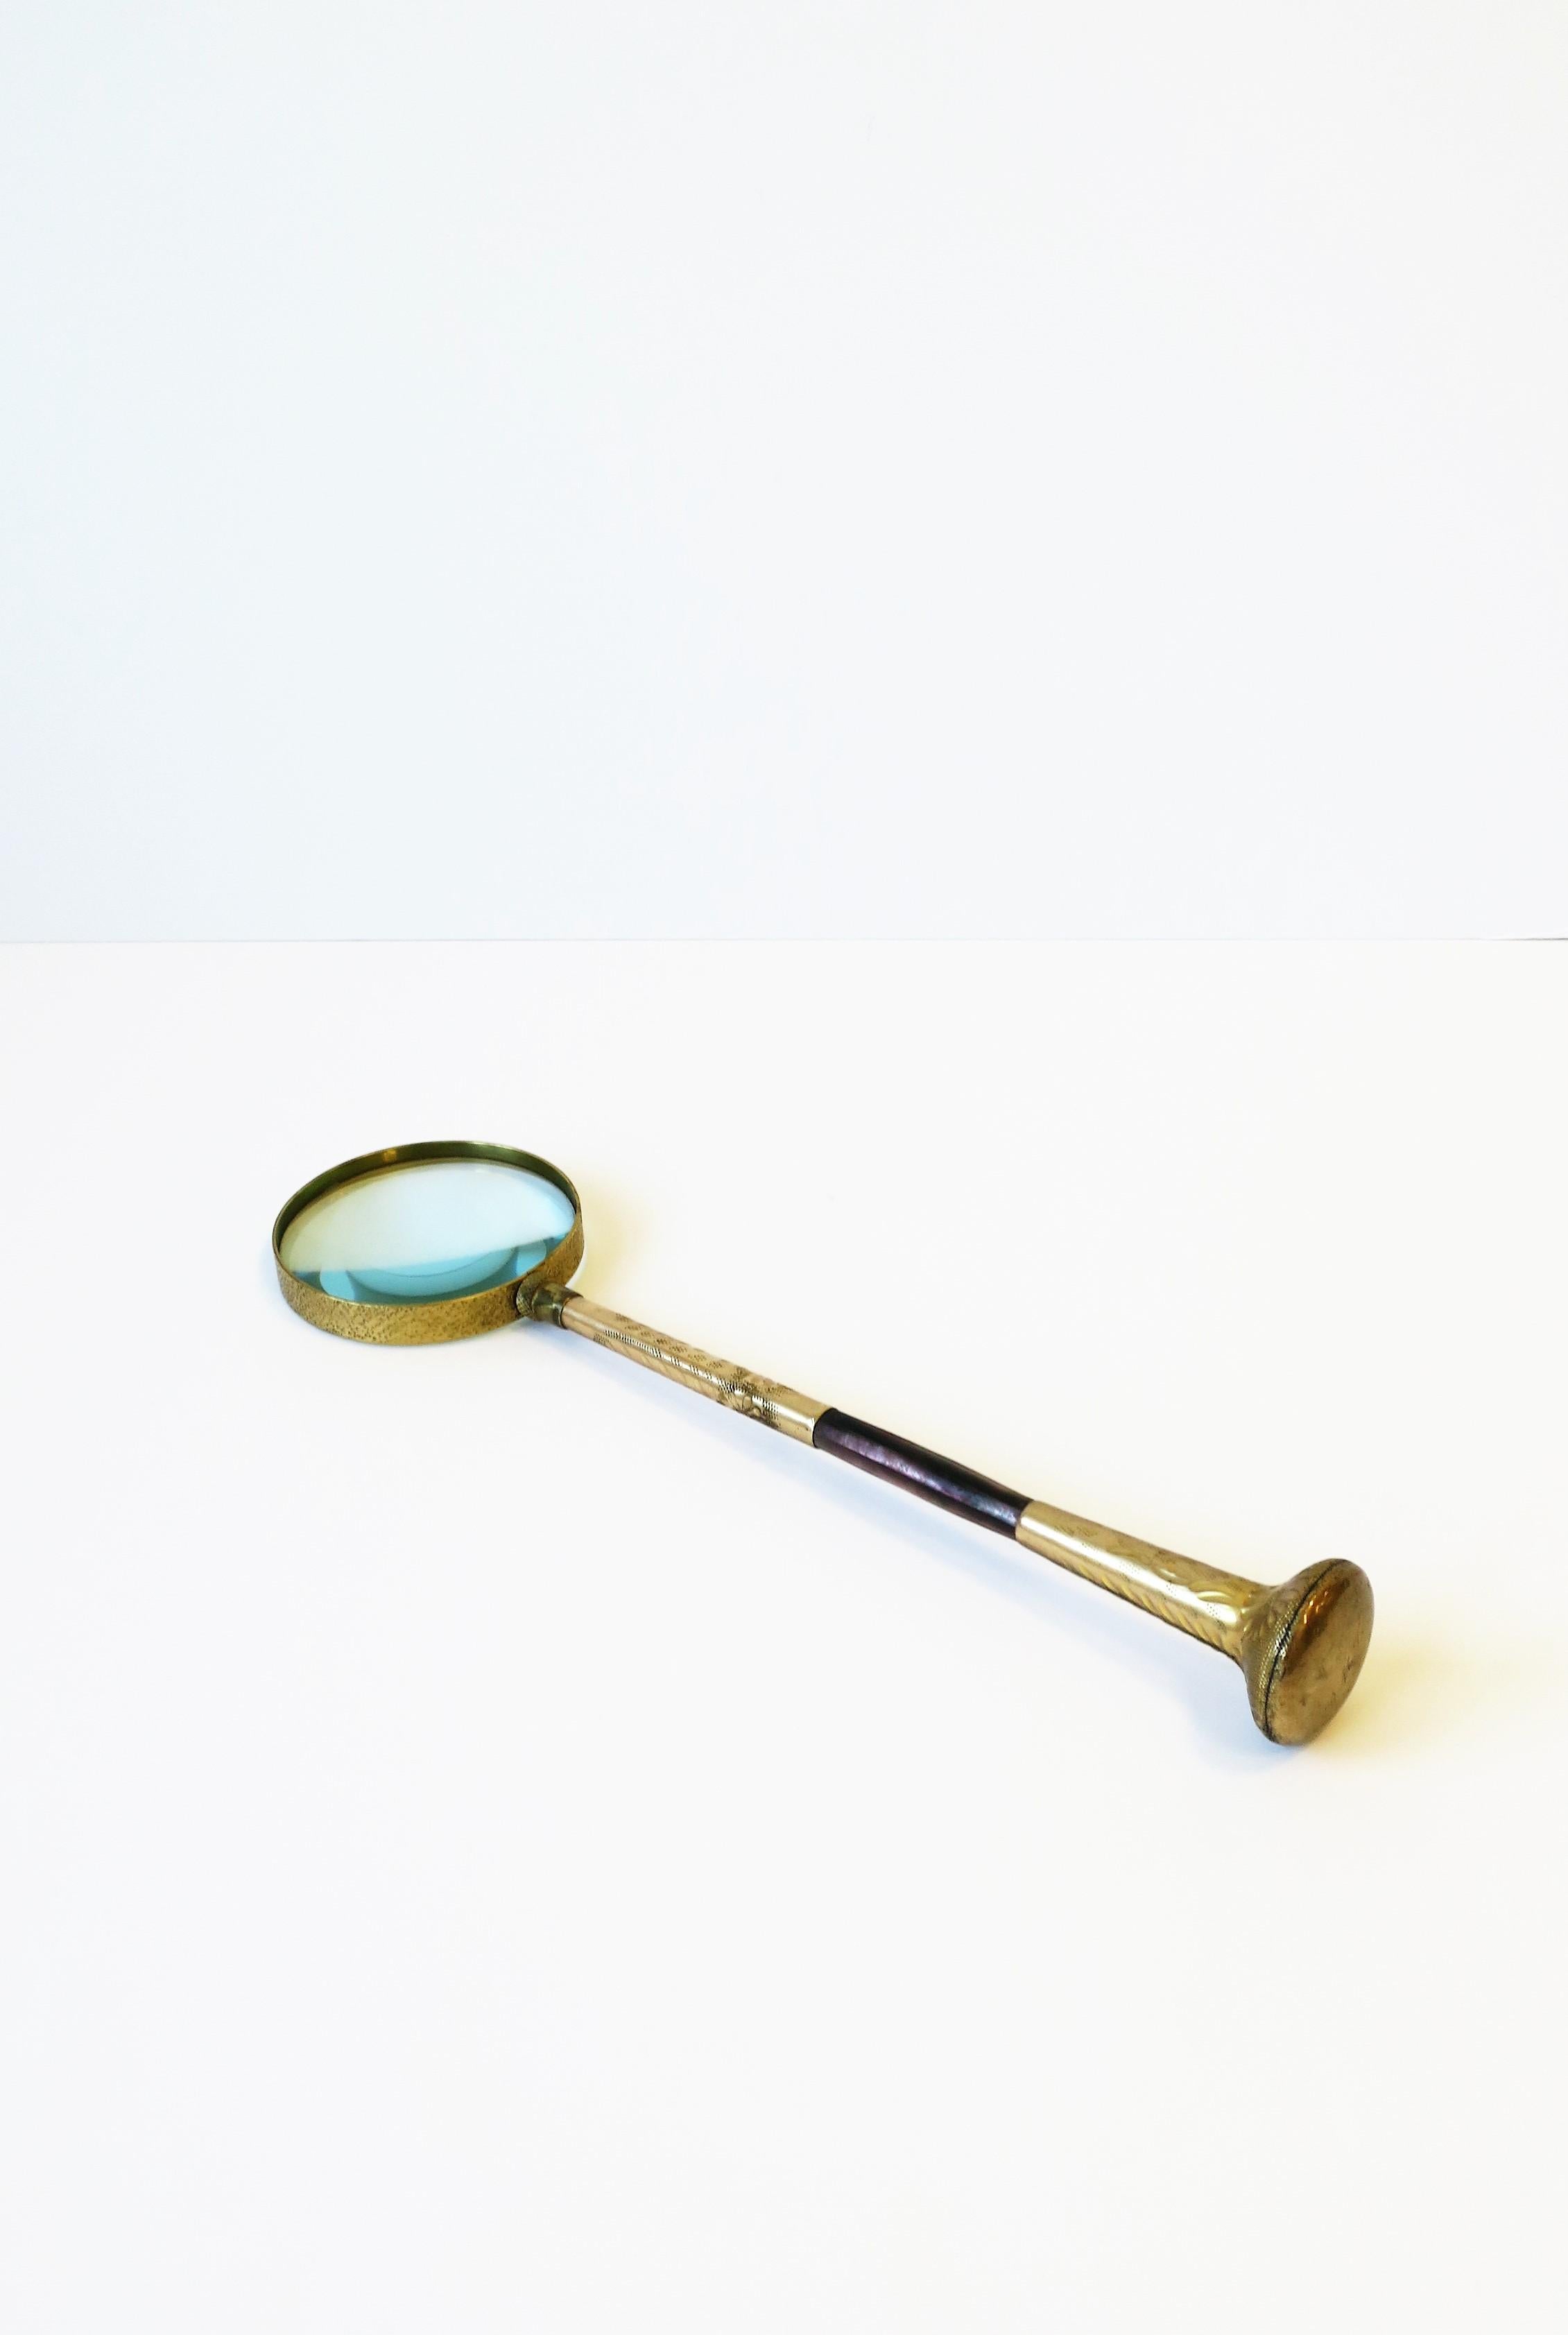 Brass and Abalone Seashell Magnifying Glass 1